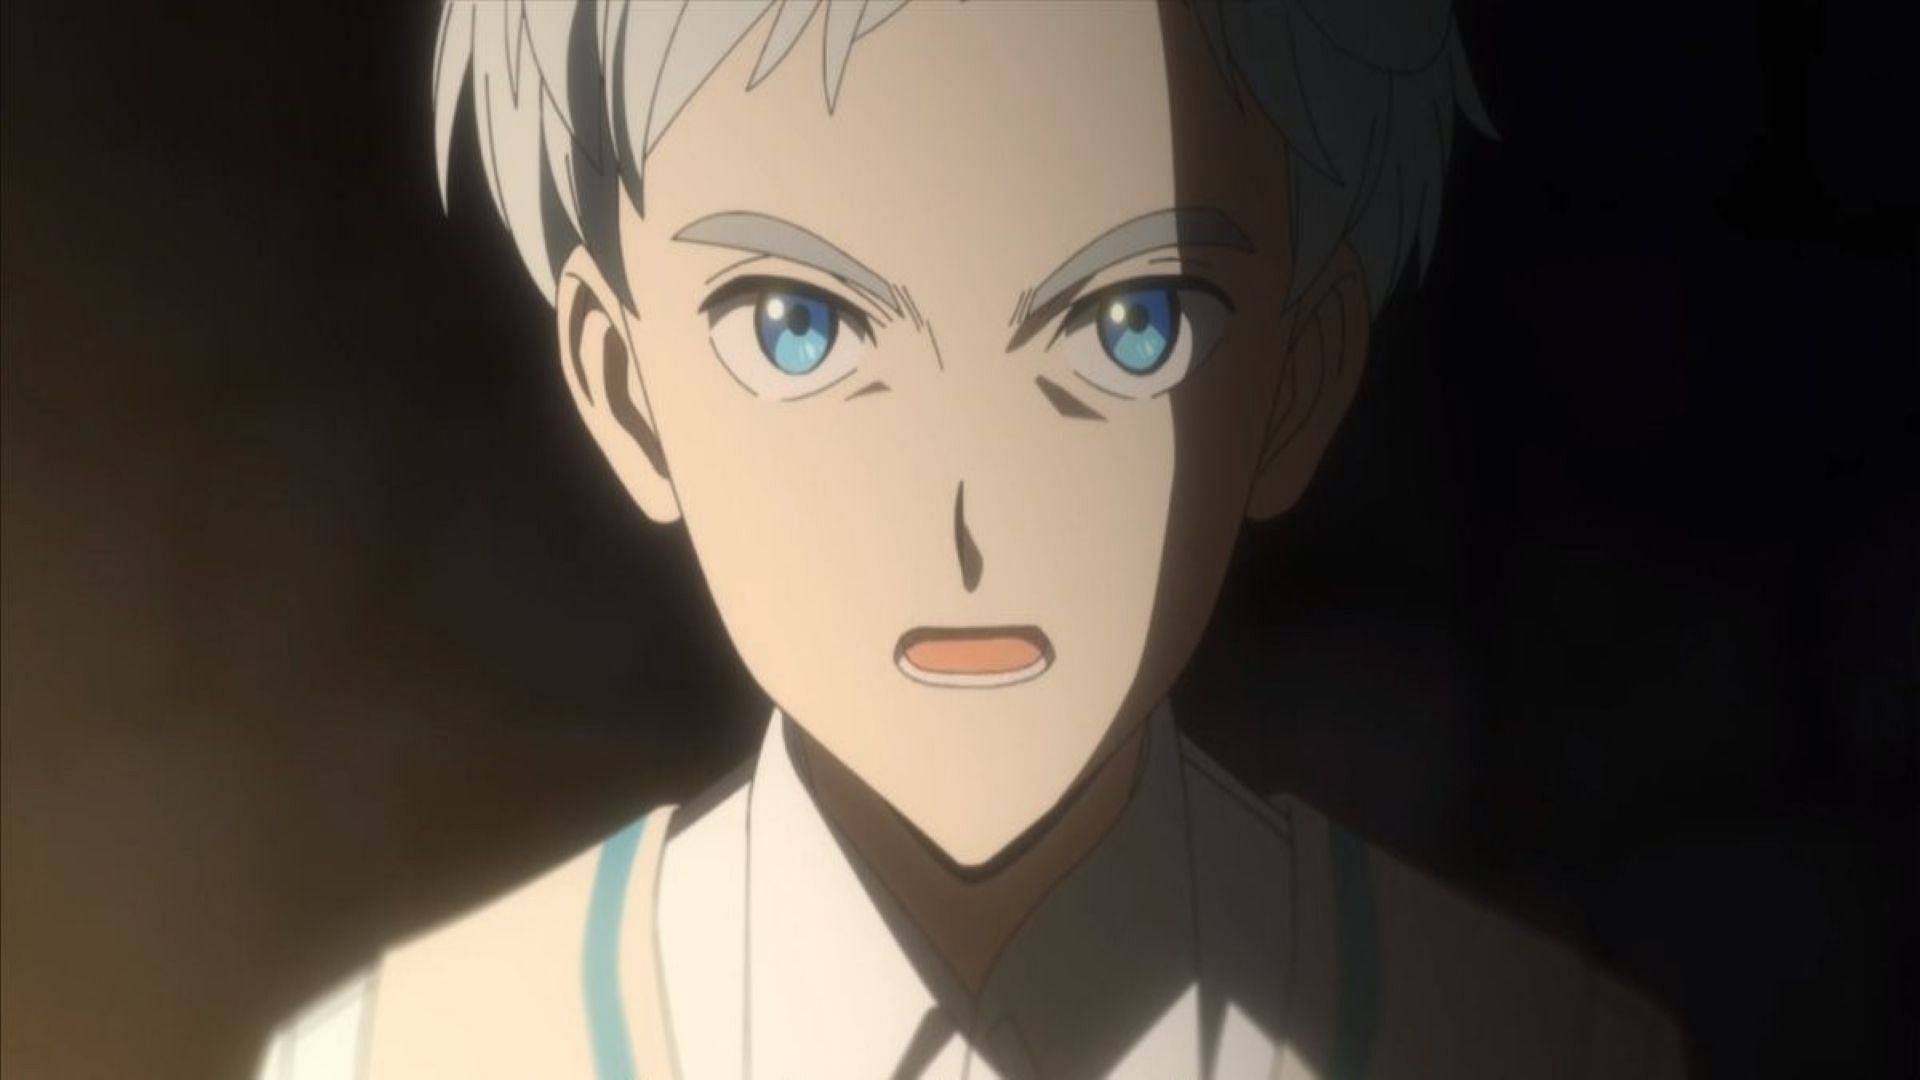 Norman as seen in The Promised Neverland (Image via Cloverworks)